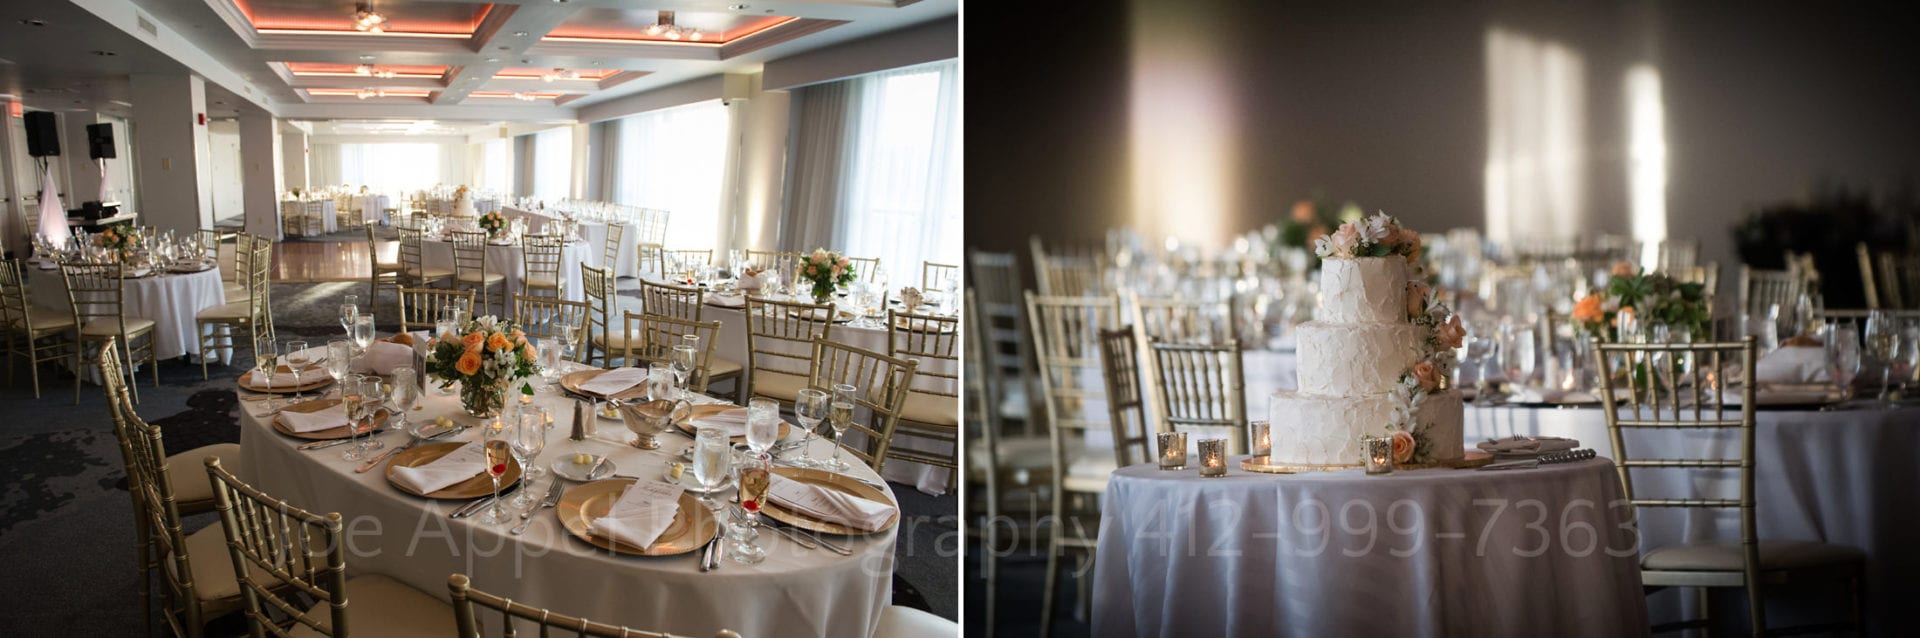 white and gold dining tables and a white wedding cake with orange and white flowers at a Renaissance Pittsburgh wedding.